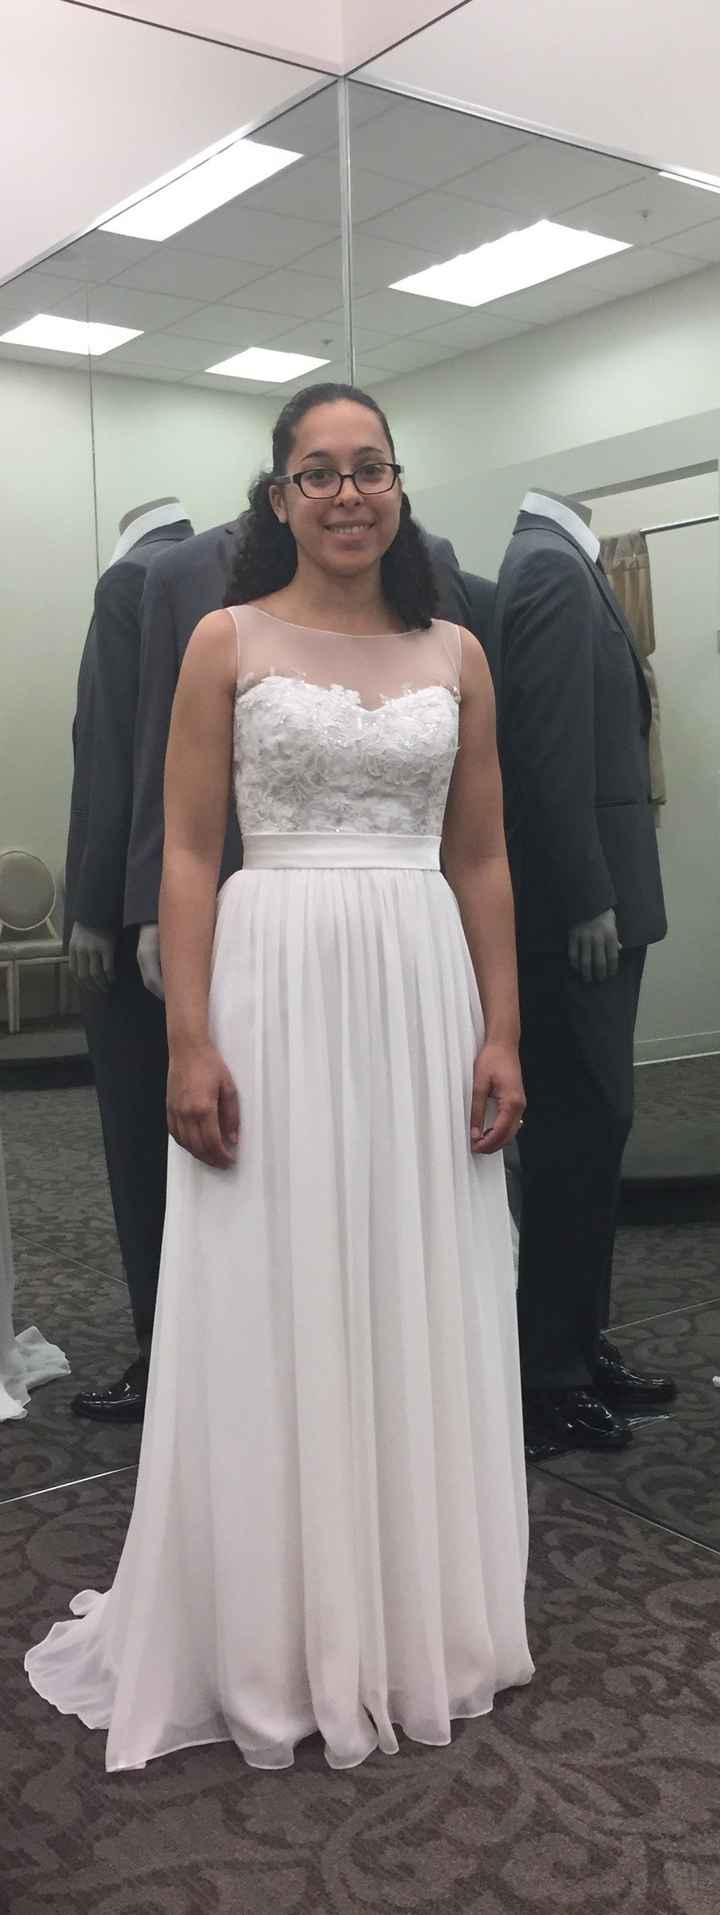 I had my final fitting today!